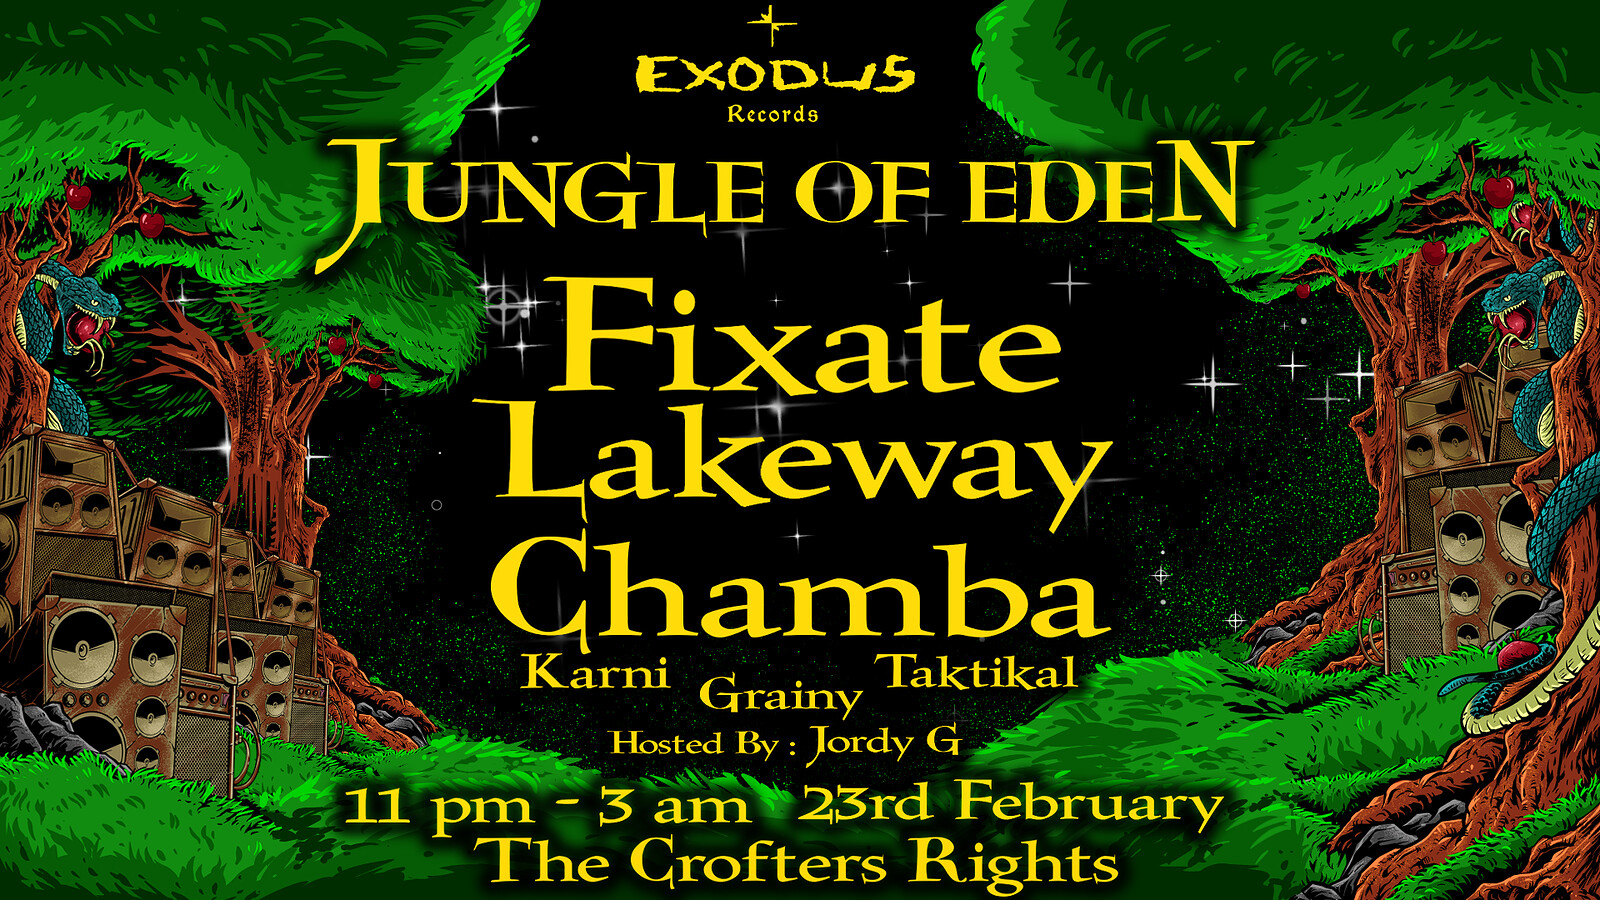 Jungle Of Eden - Fixate, Lakeway & Chamba at Crofters Rights